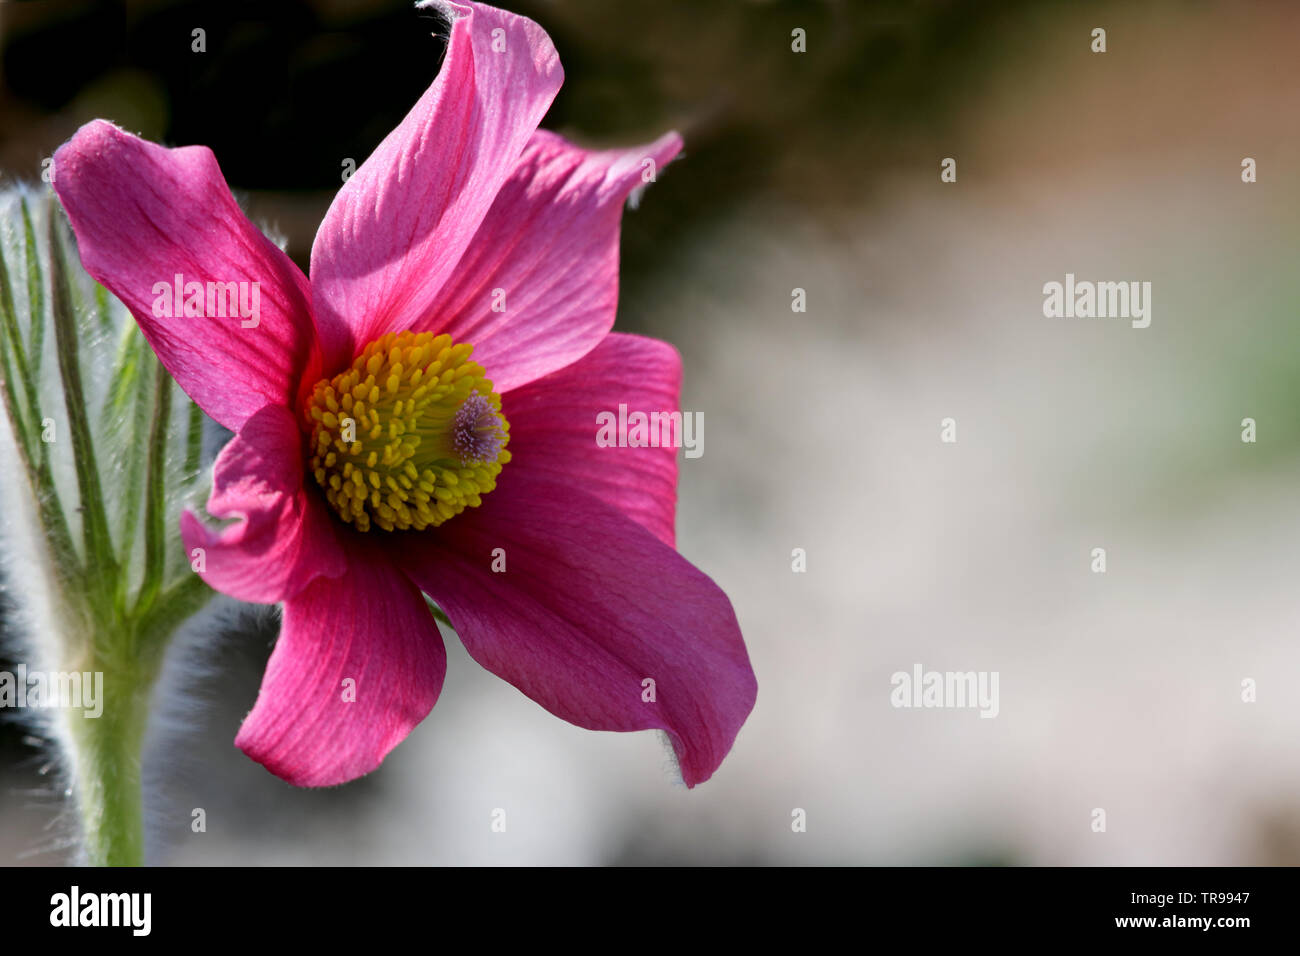 Pink cultivated pulsatilla flower blooming  in garden on a sunny day Stock Photo